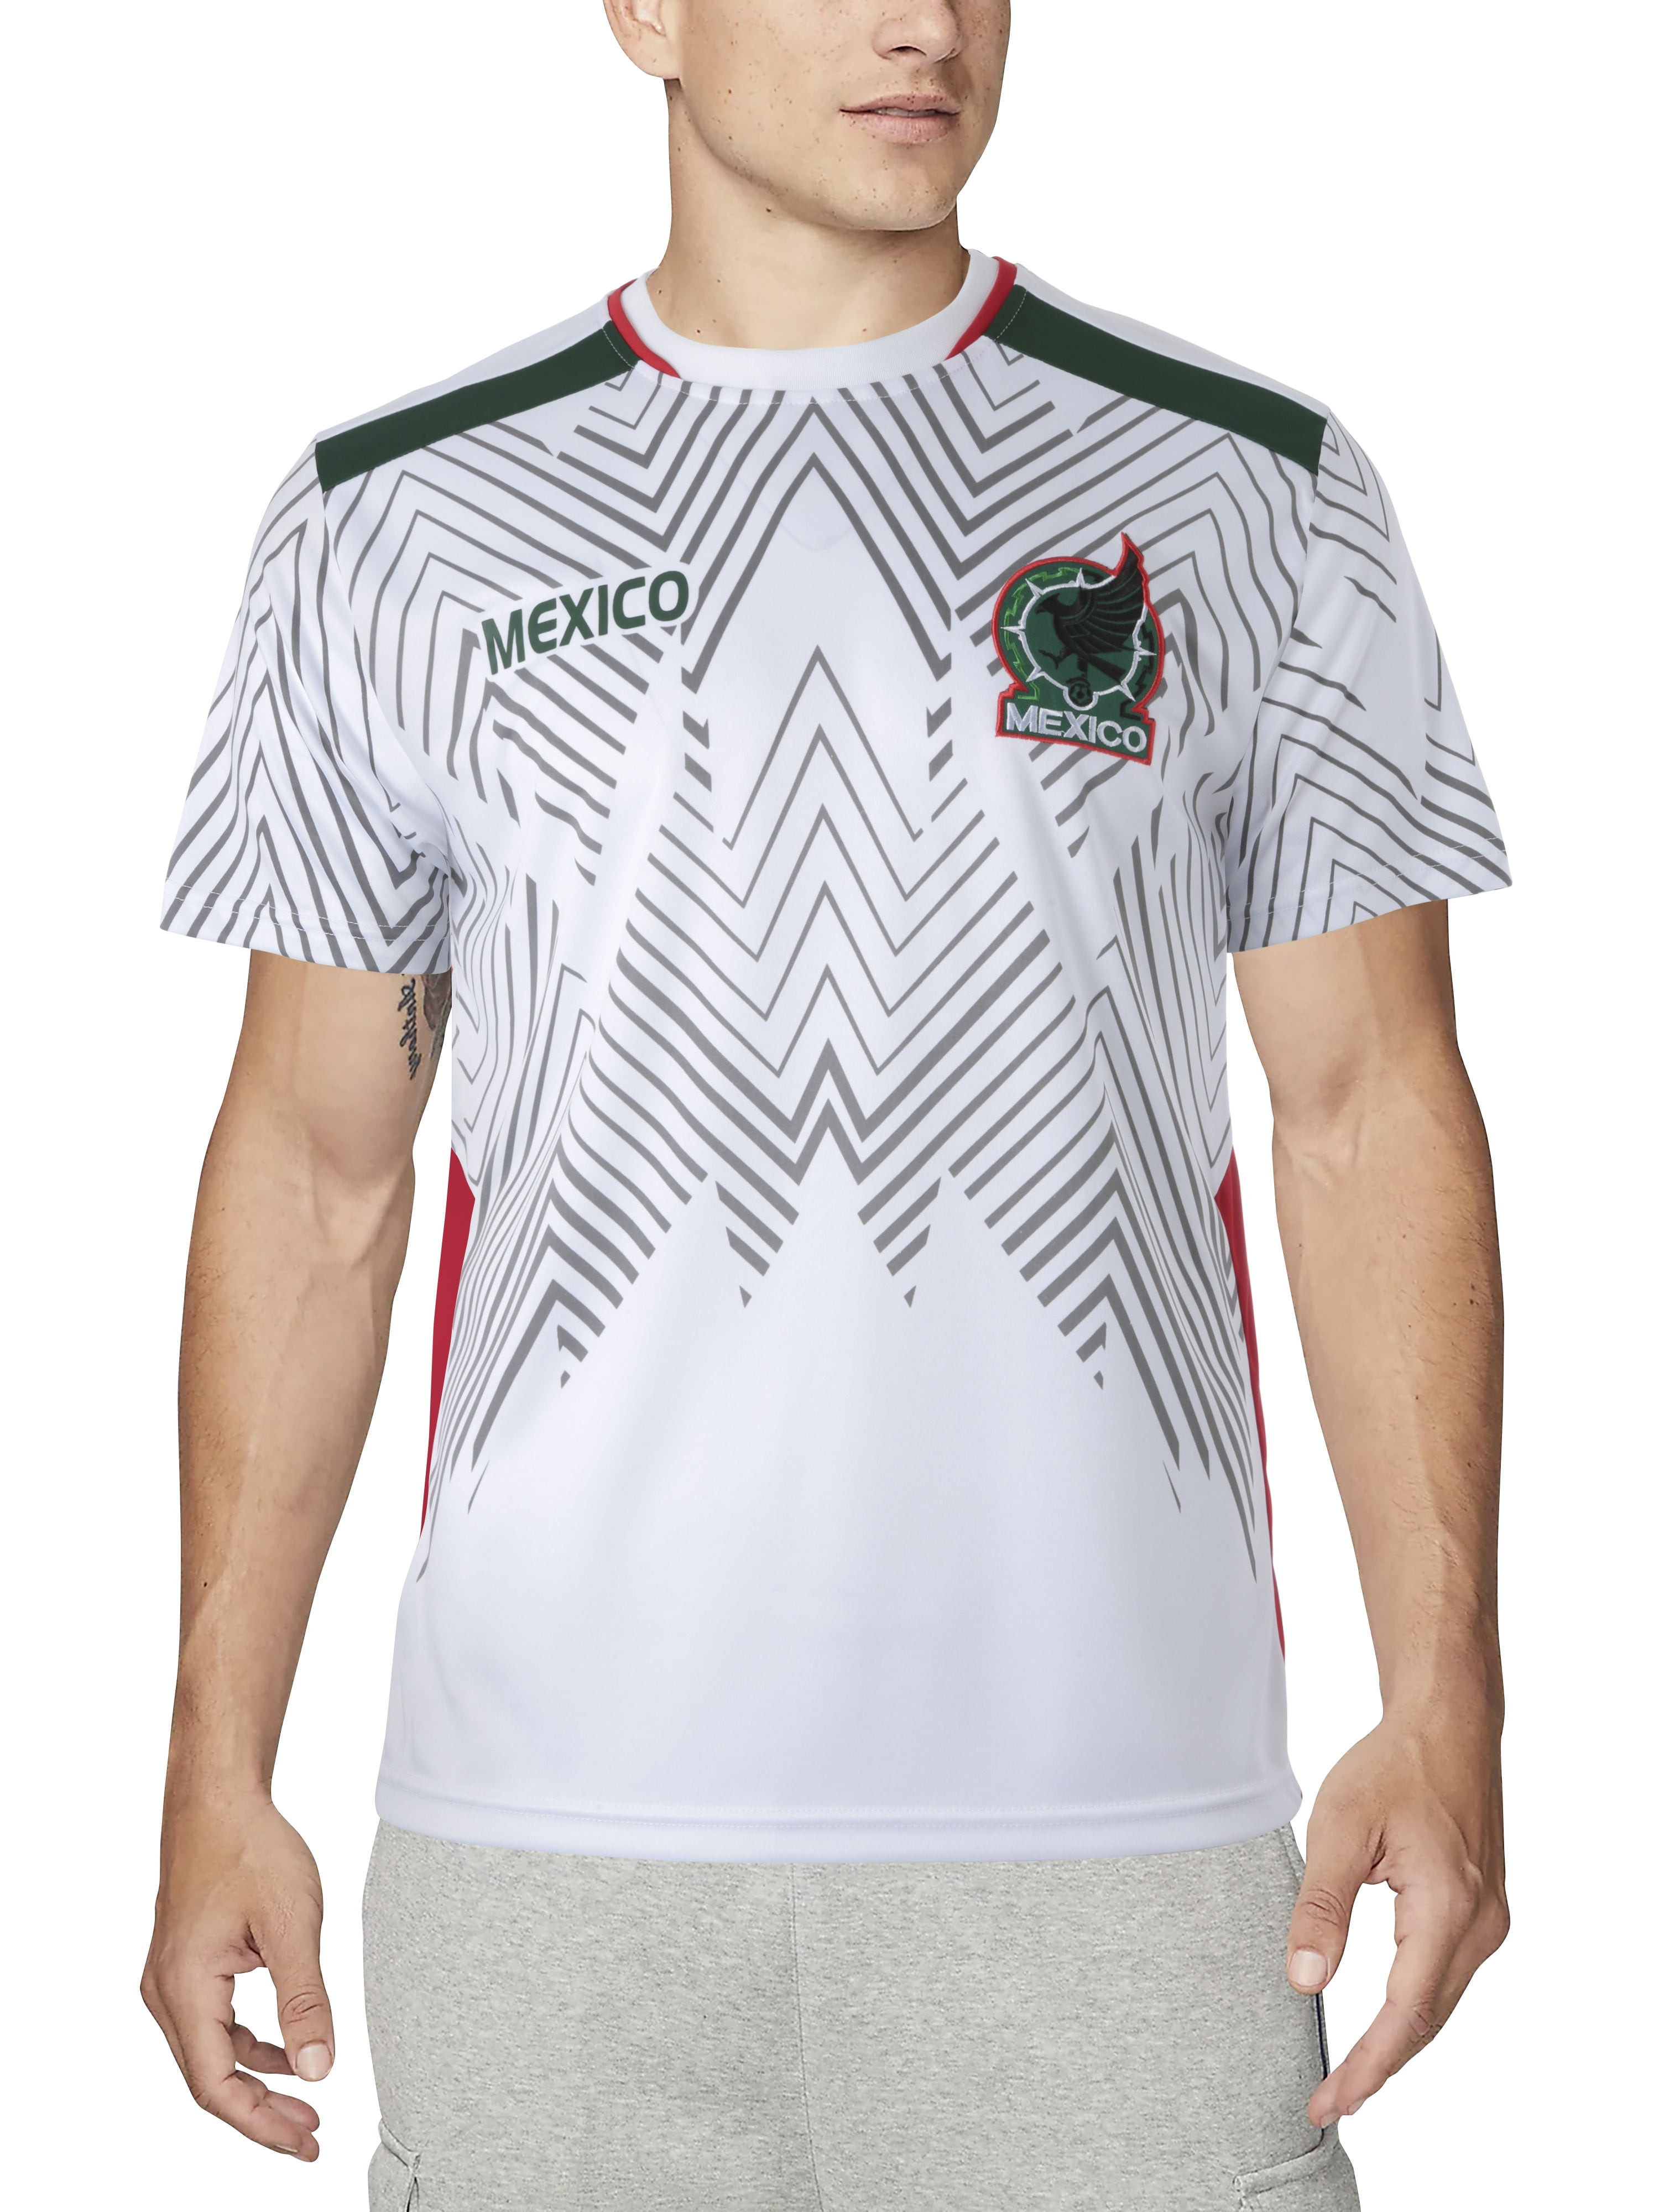 Hat and Beyond Men's Mexico Football Soccer Pullover National Team Quick Dry Jersey Shirt, Size: Small, White